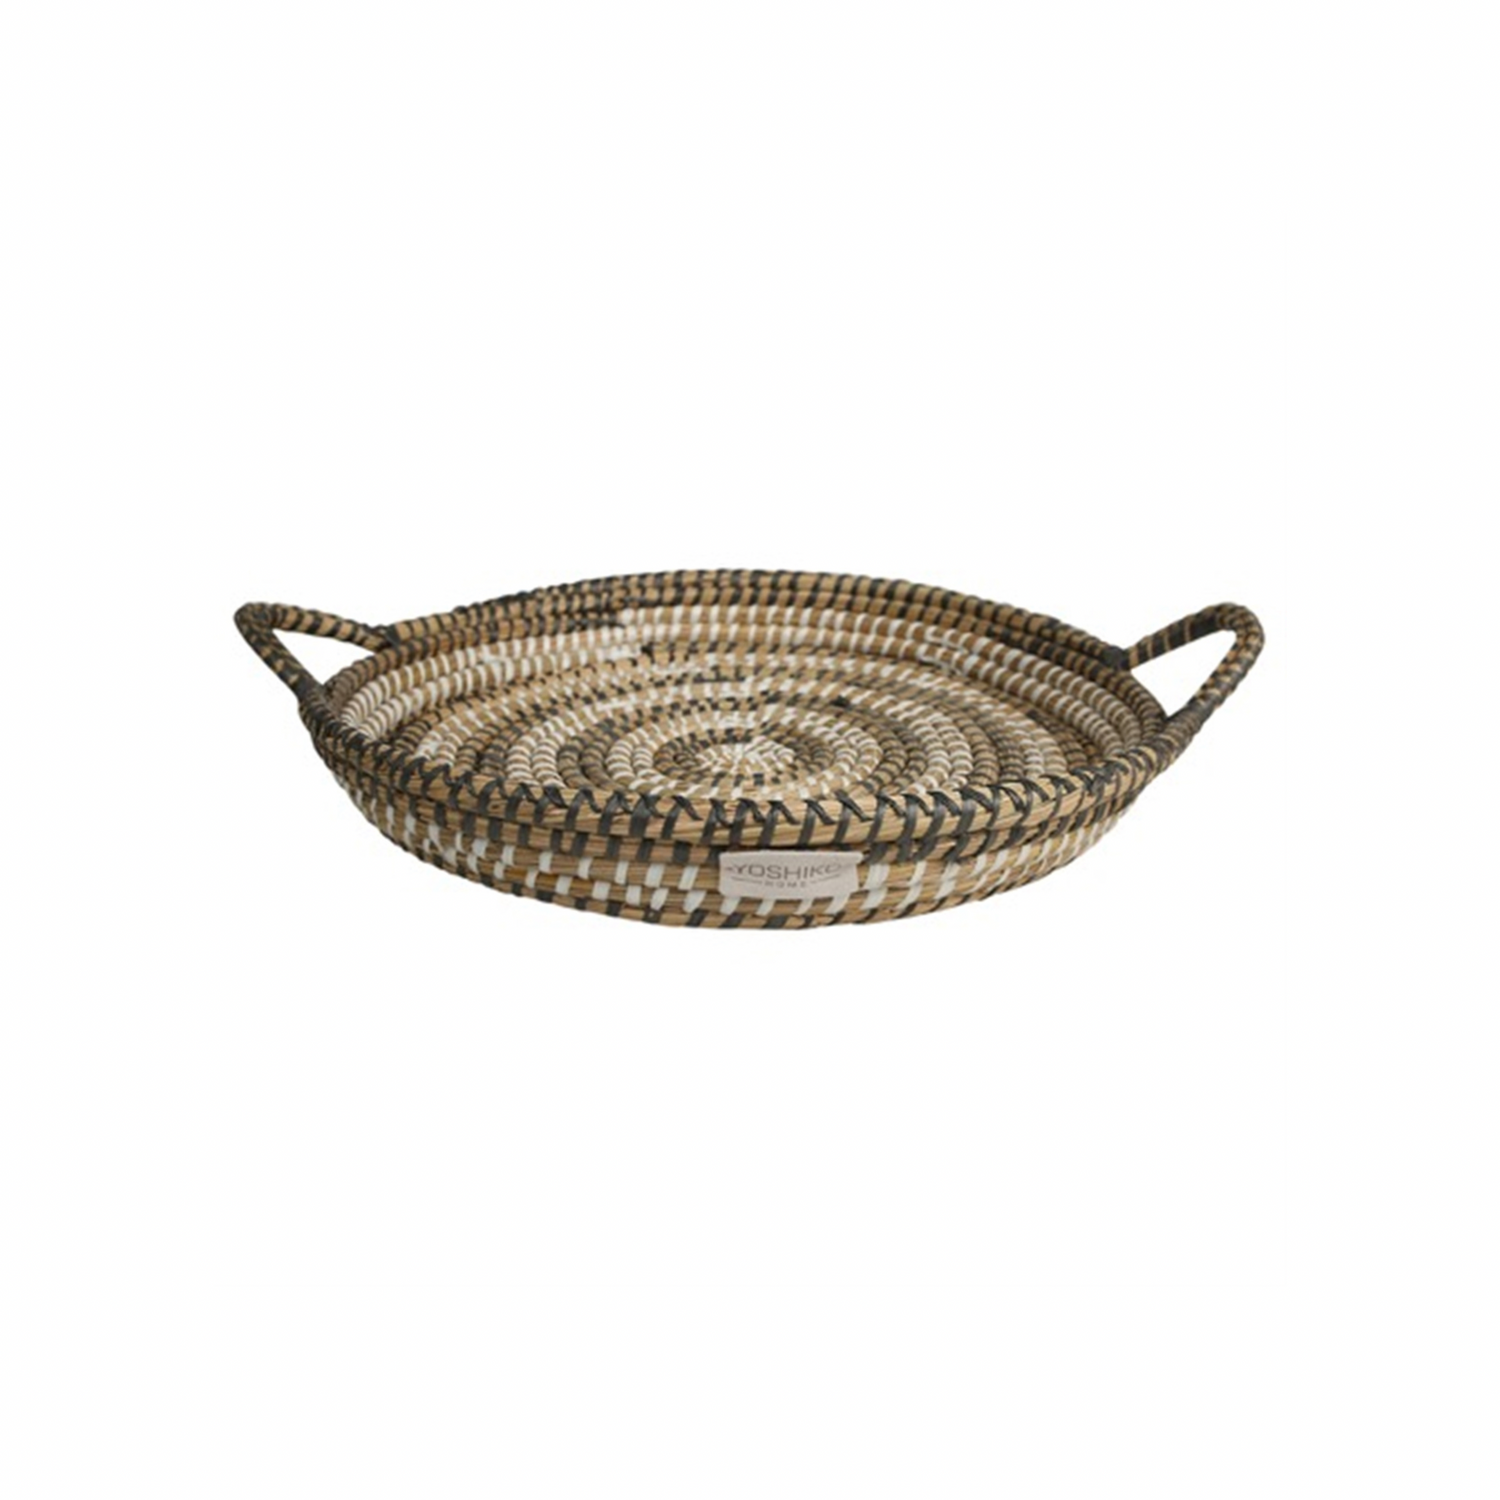 Oversized black and beige striped woven tray with handles 